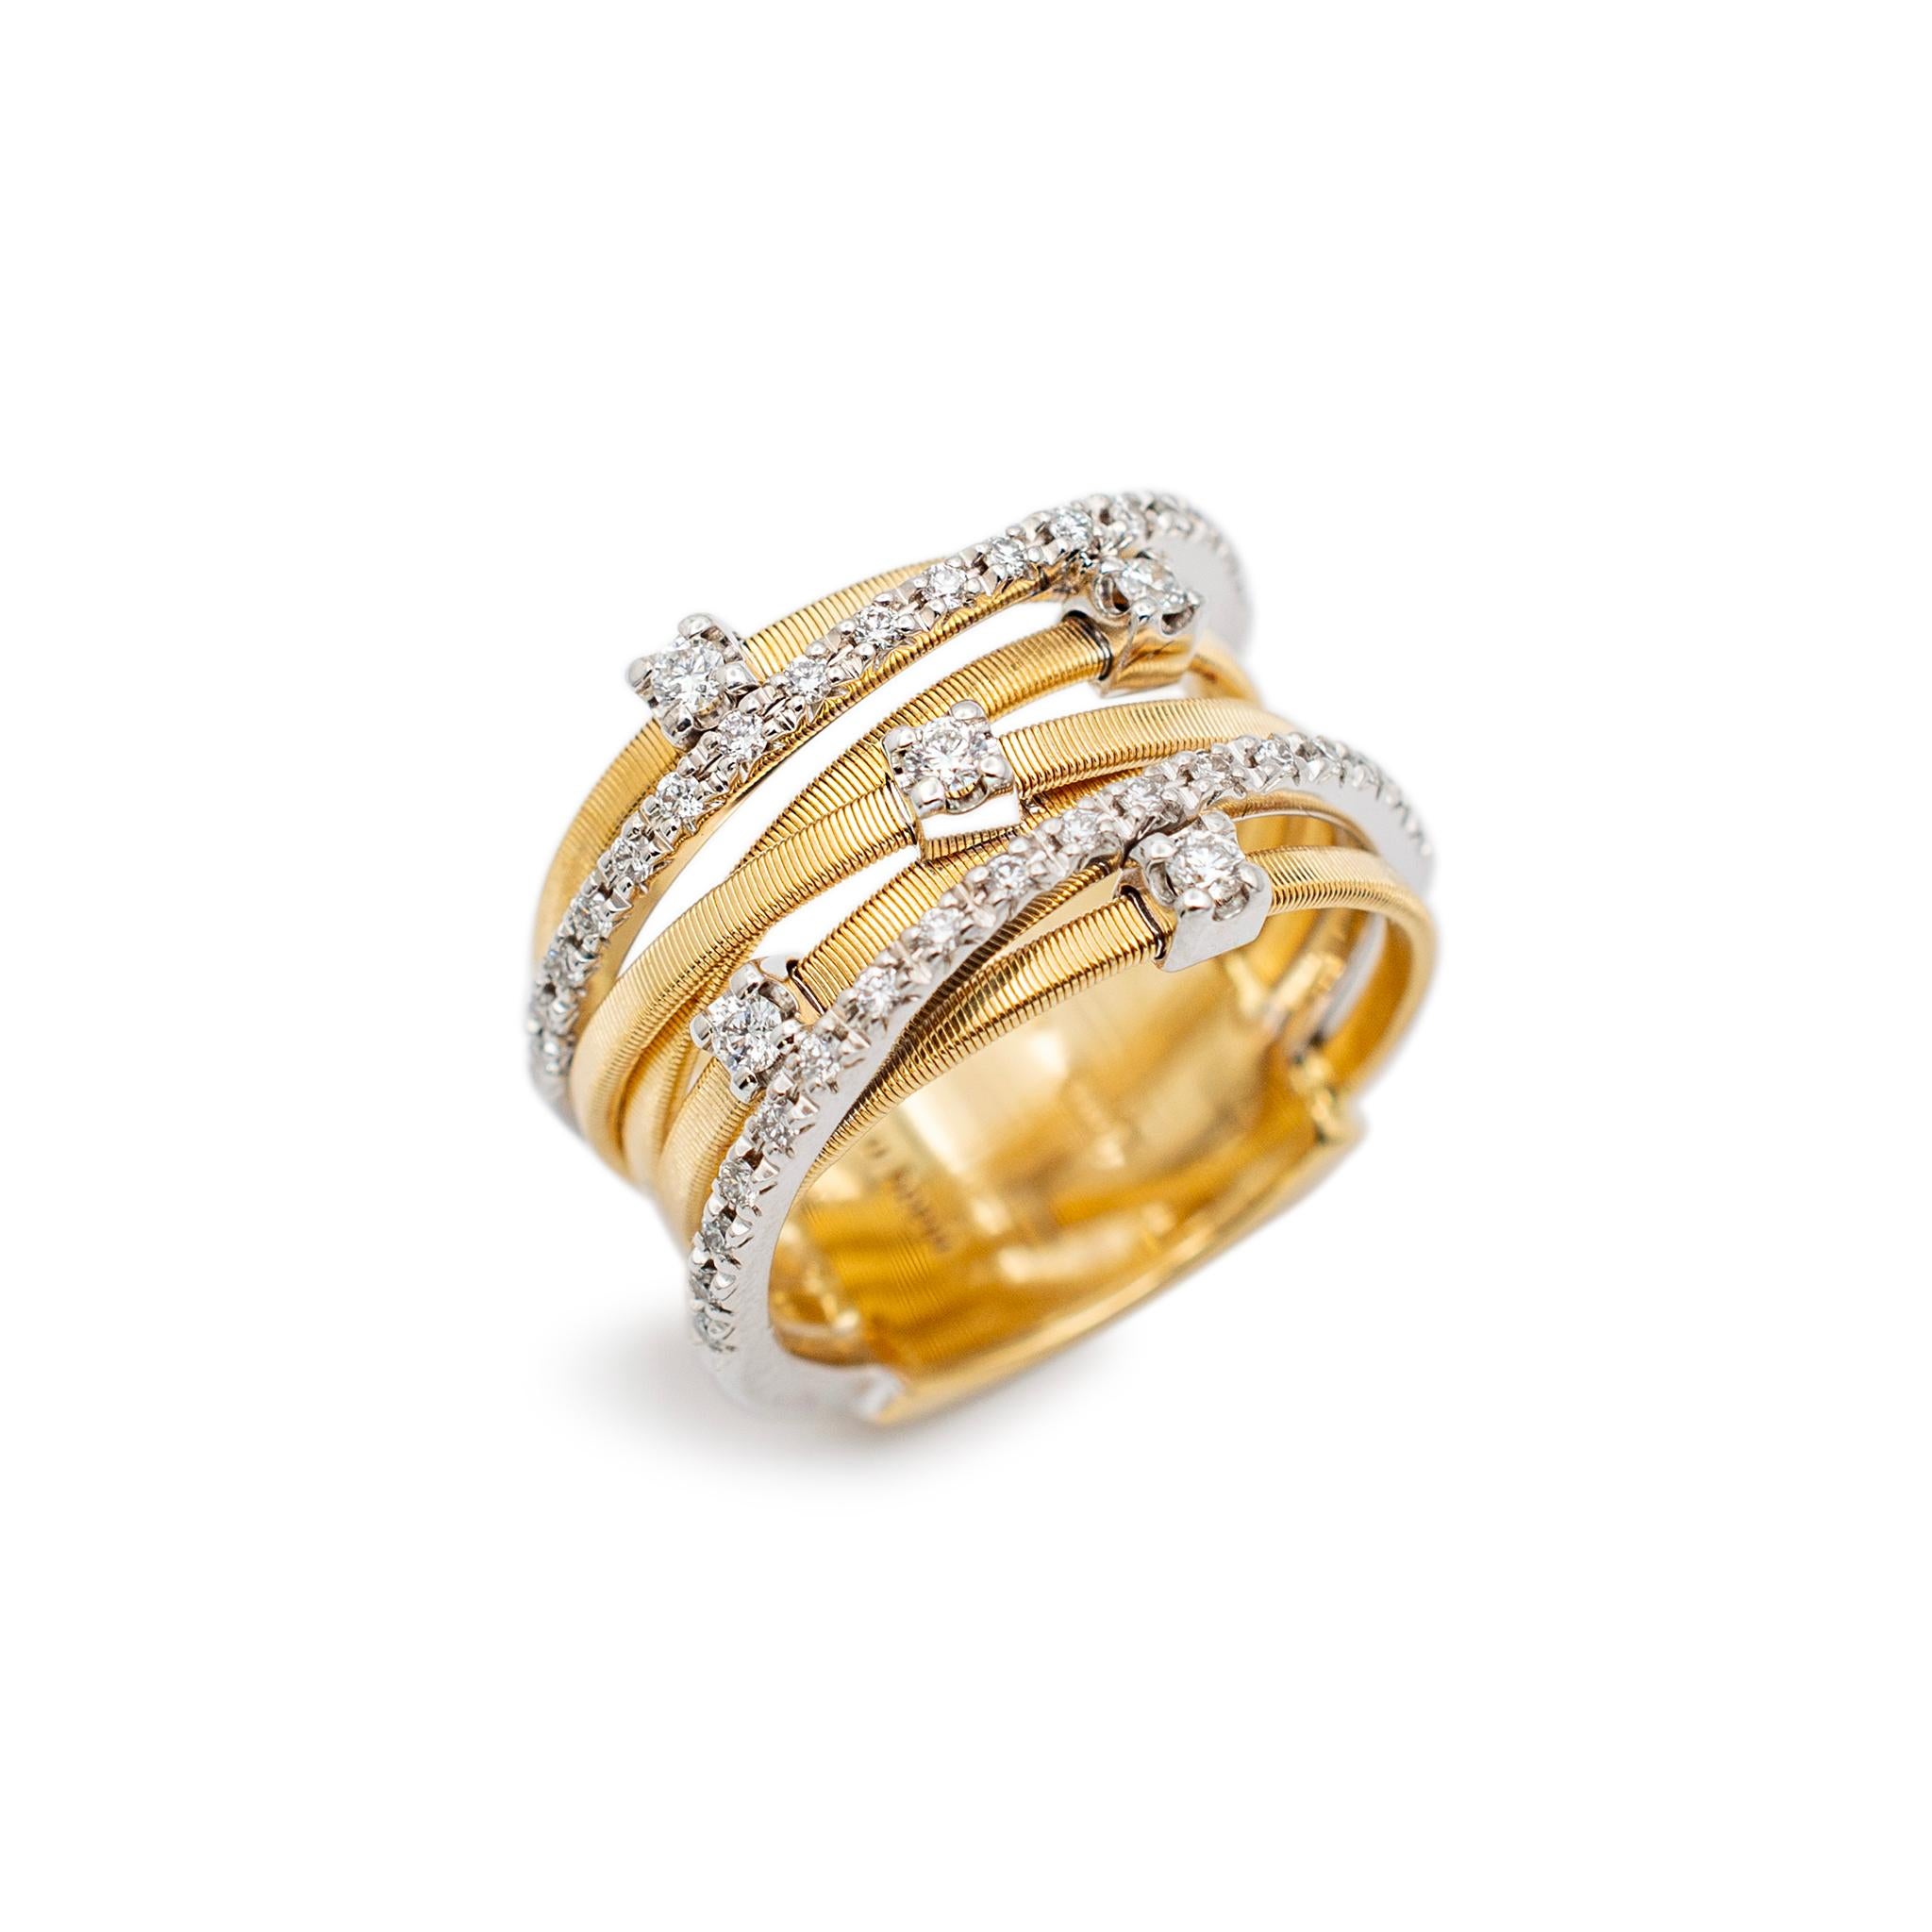 Brand: Marco Bicego

Gender: Ladies

Metal Type: 18K White & Yellow Gold

Size: 6.5

Shank Maximum Width: 13.15 mm

Weight: 11.10 grams
Ladies 18K white & yellow gold diamond cocktail ring with a comfort-fit shank. Engraved with 